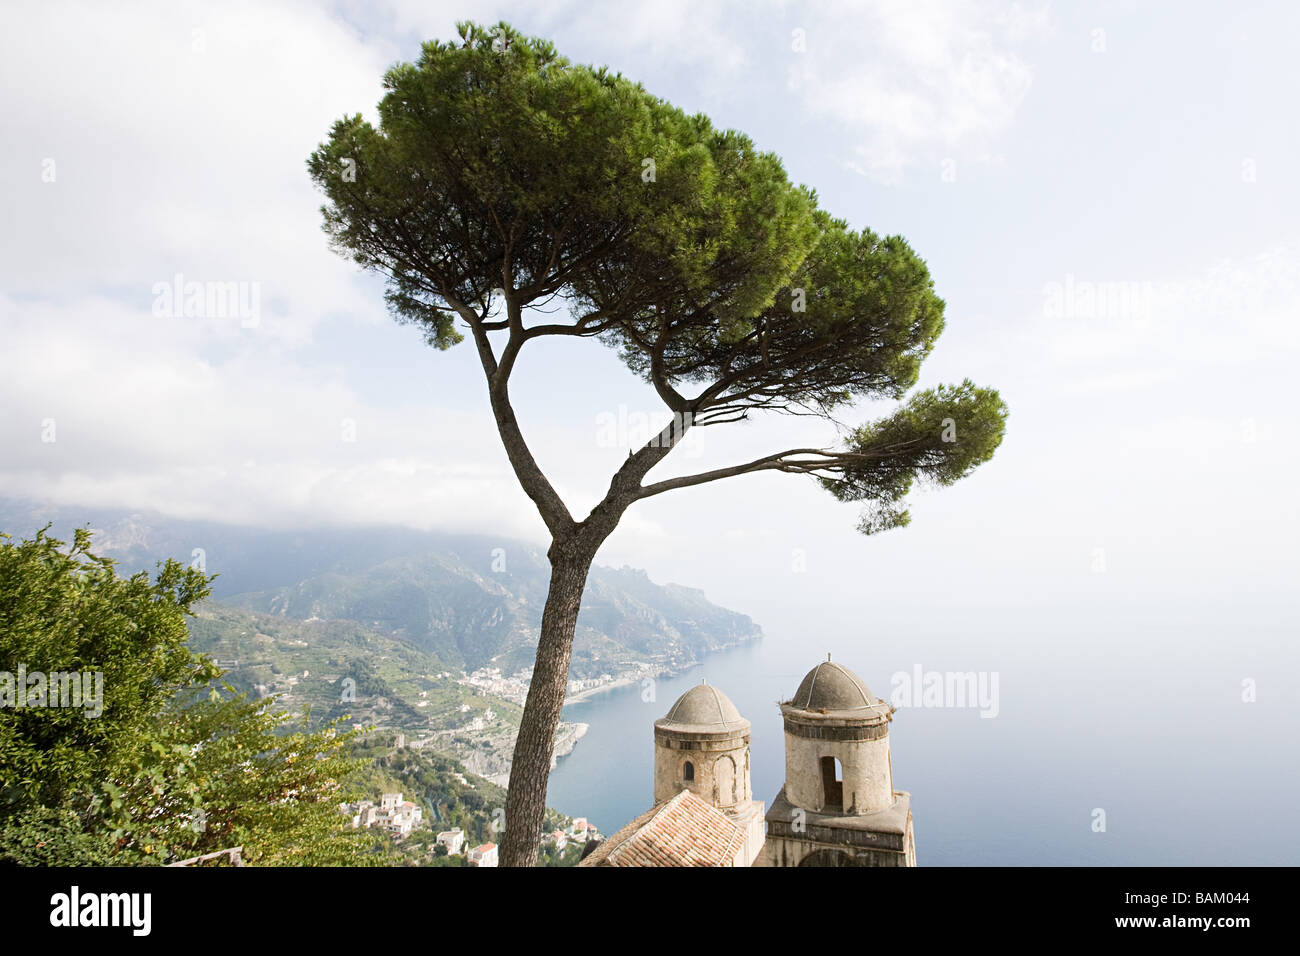 Church and tree in ravello Stock Photo